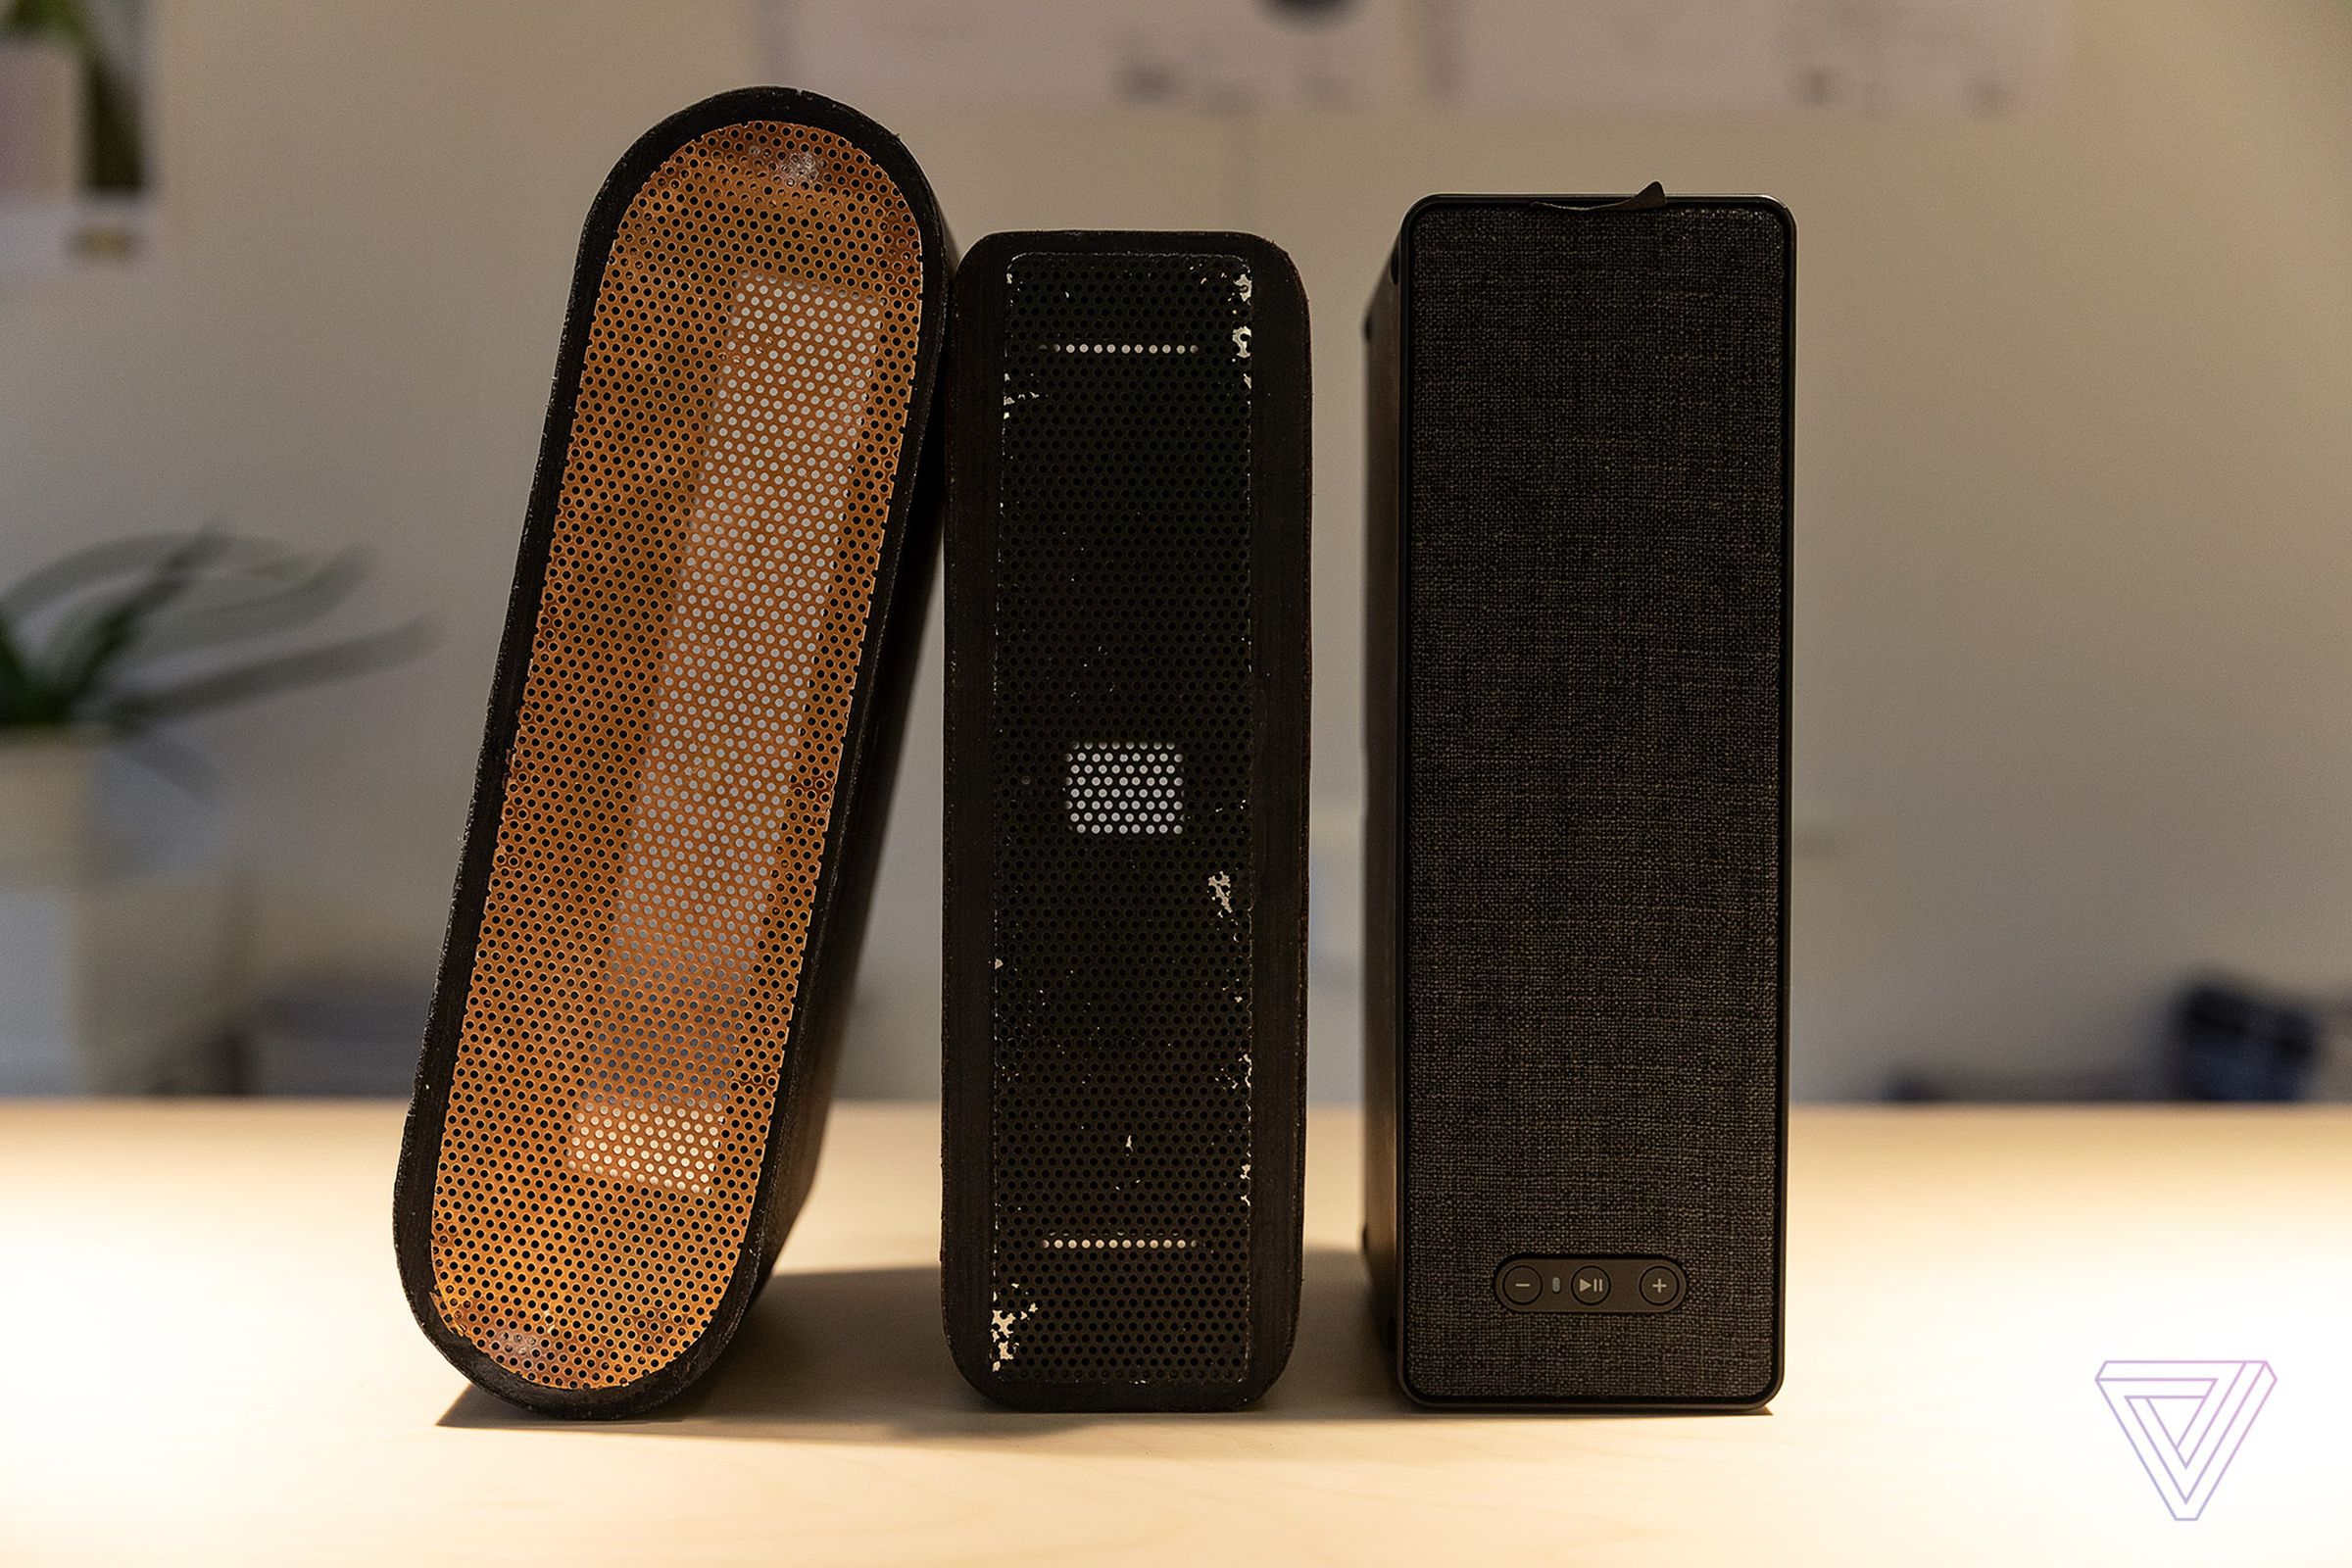 Ikea’s Sonos-compatible Symfonisk shelf speaker (right) next to two early prototypes.